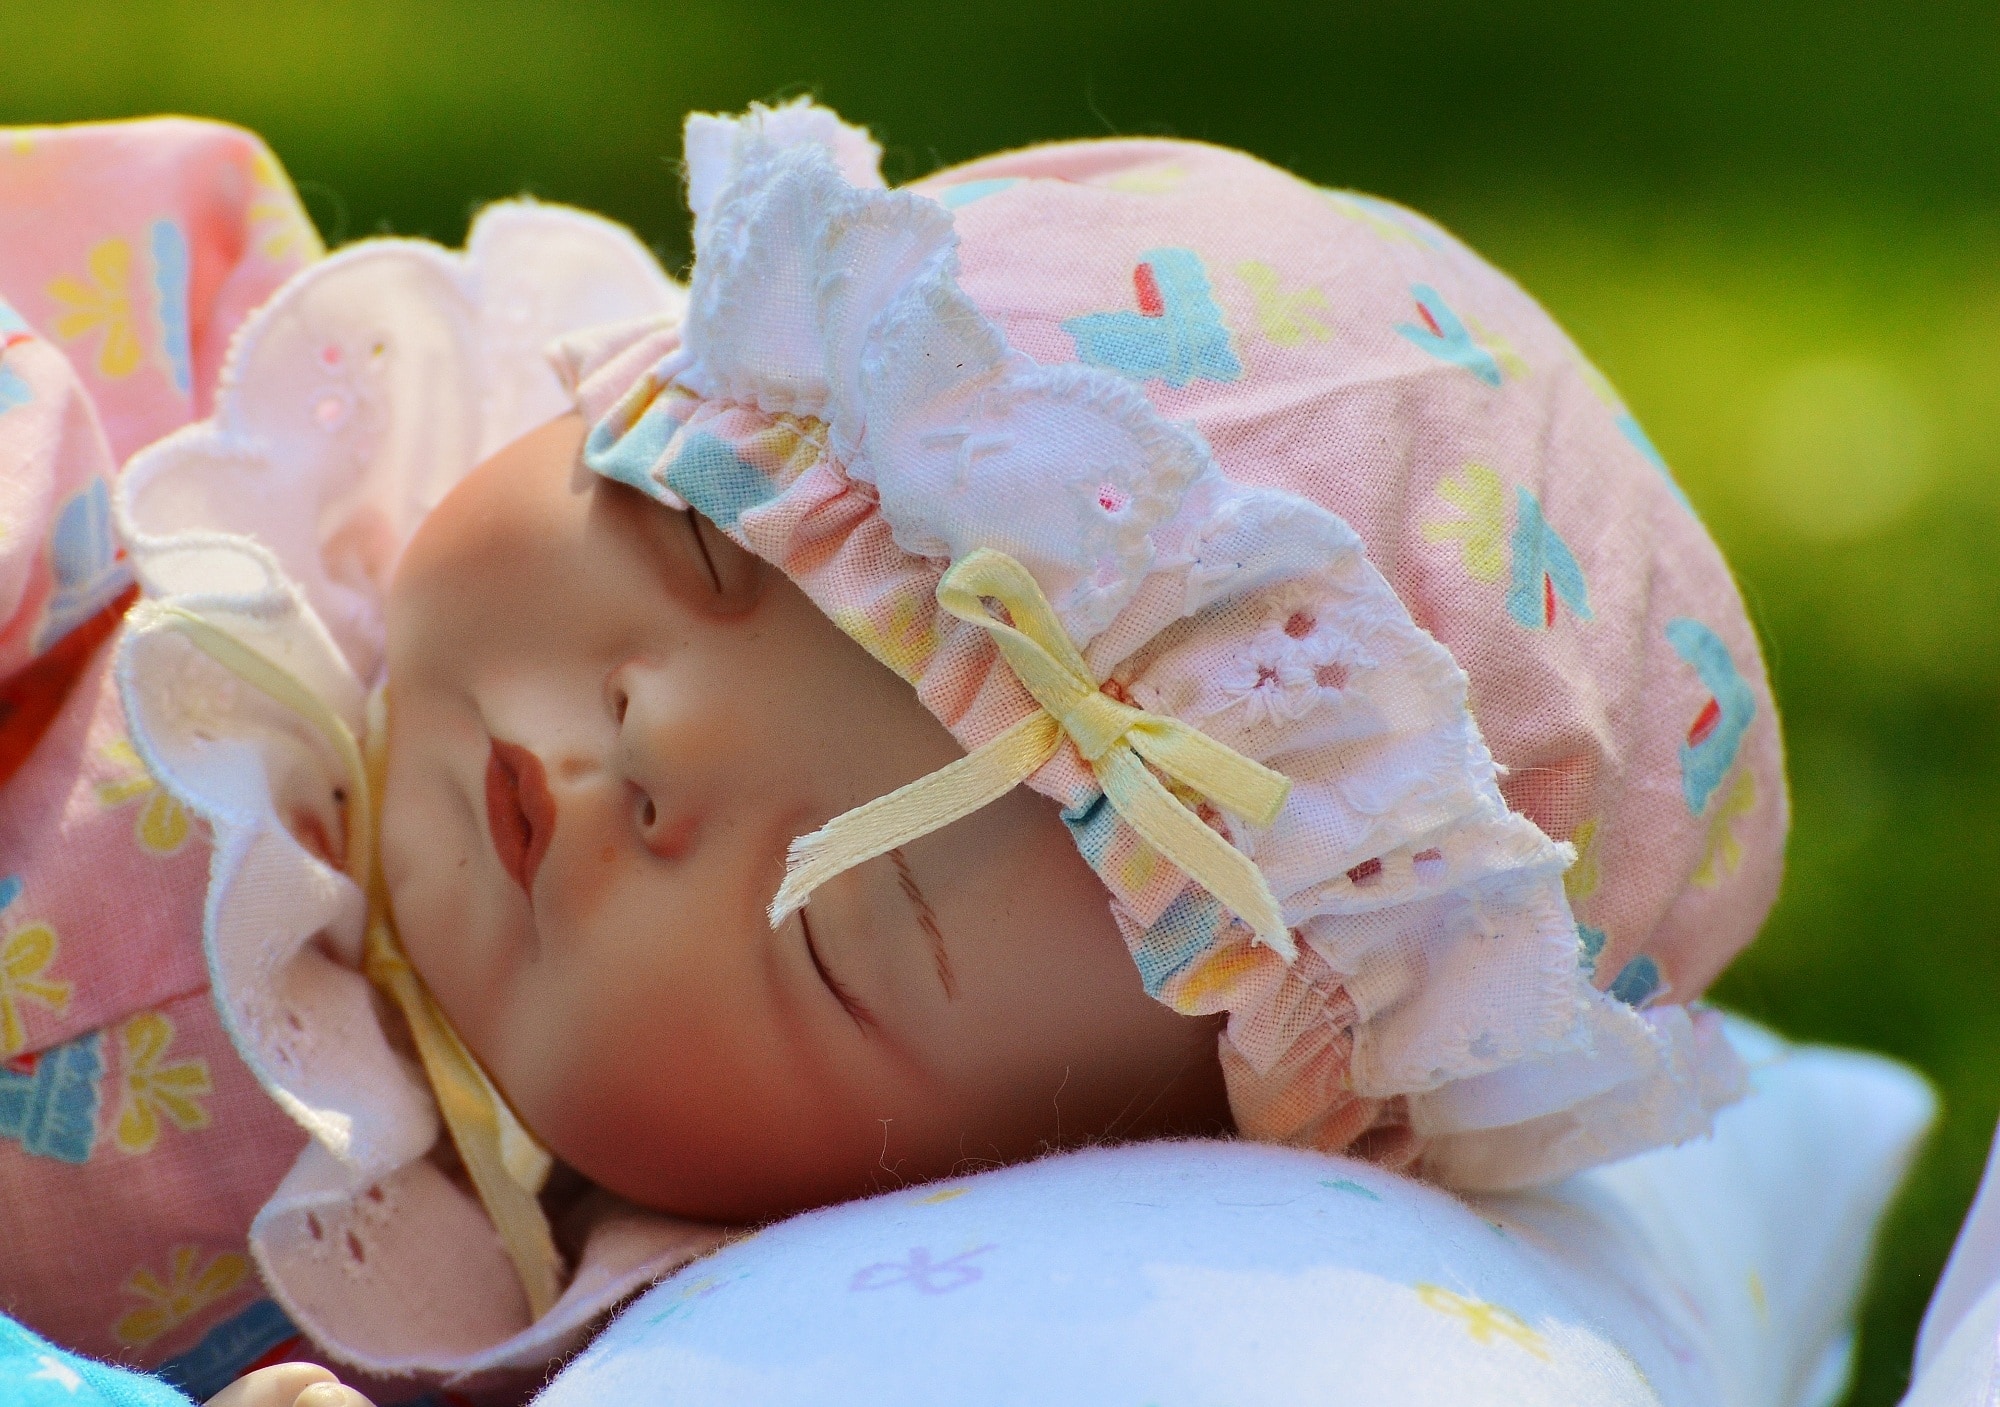 pink teal and beige dressed porcelain baby doll